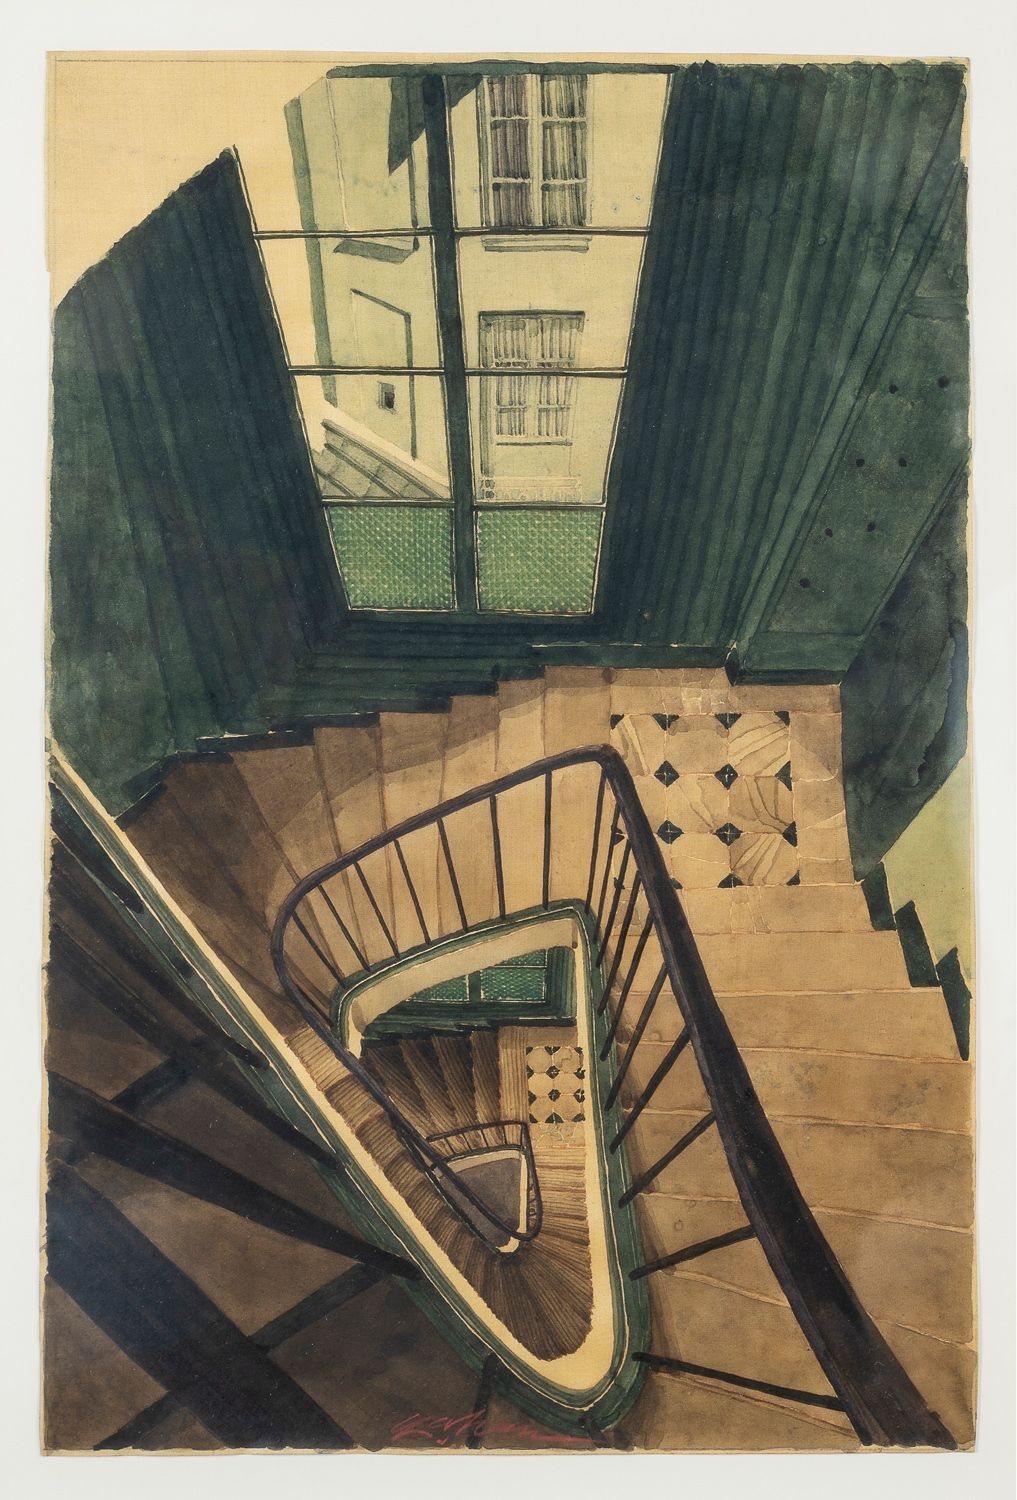 Artwork by Sam Szafran, Staircase, Made of Watercolor on silk